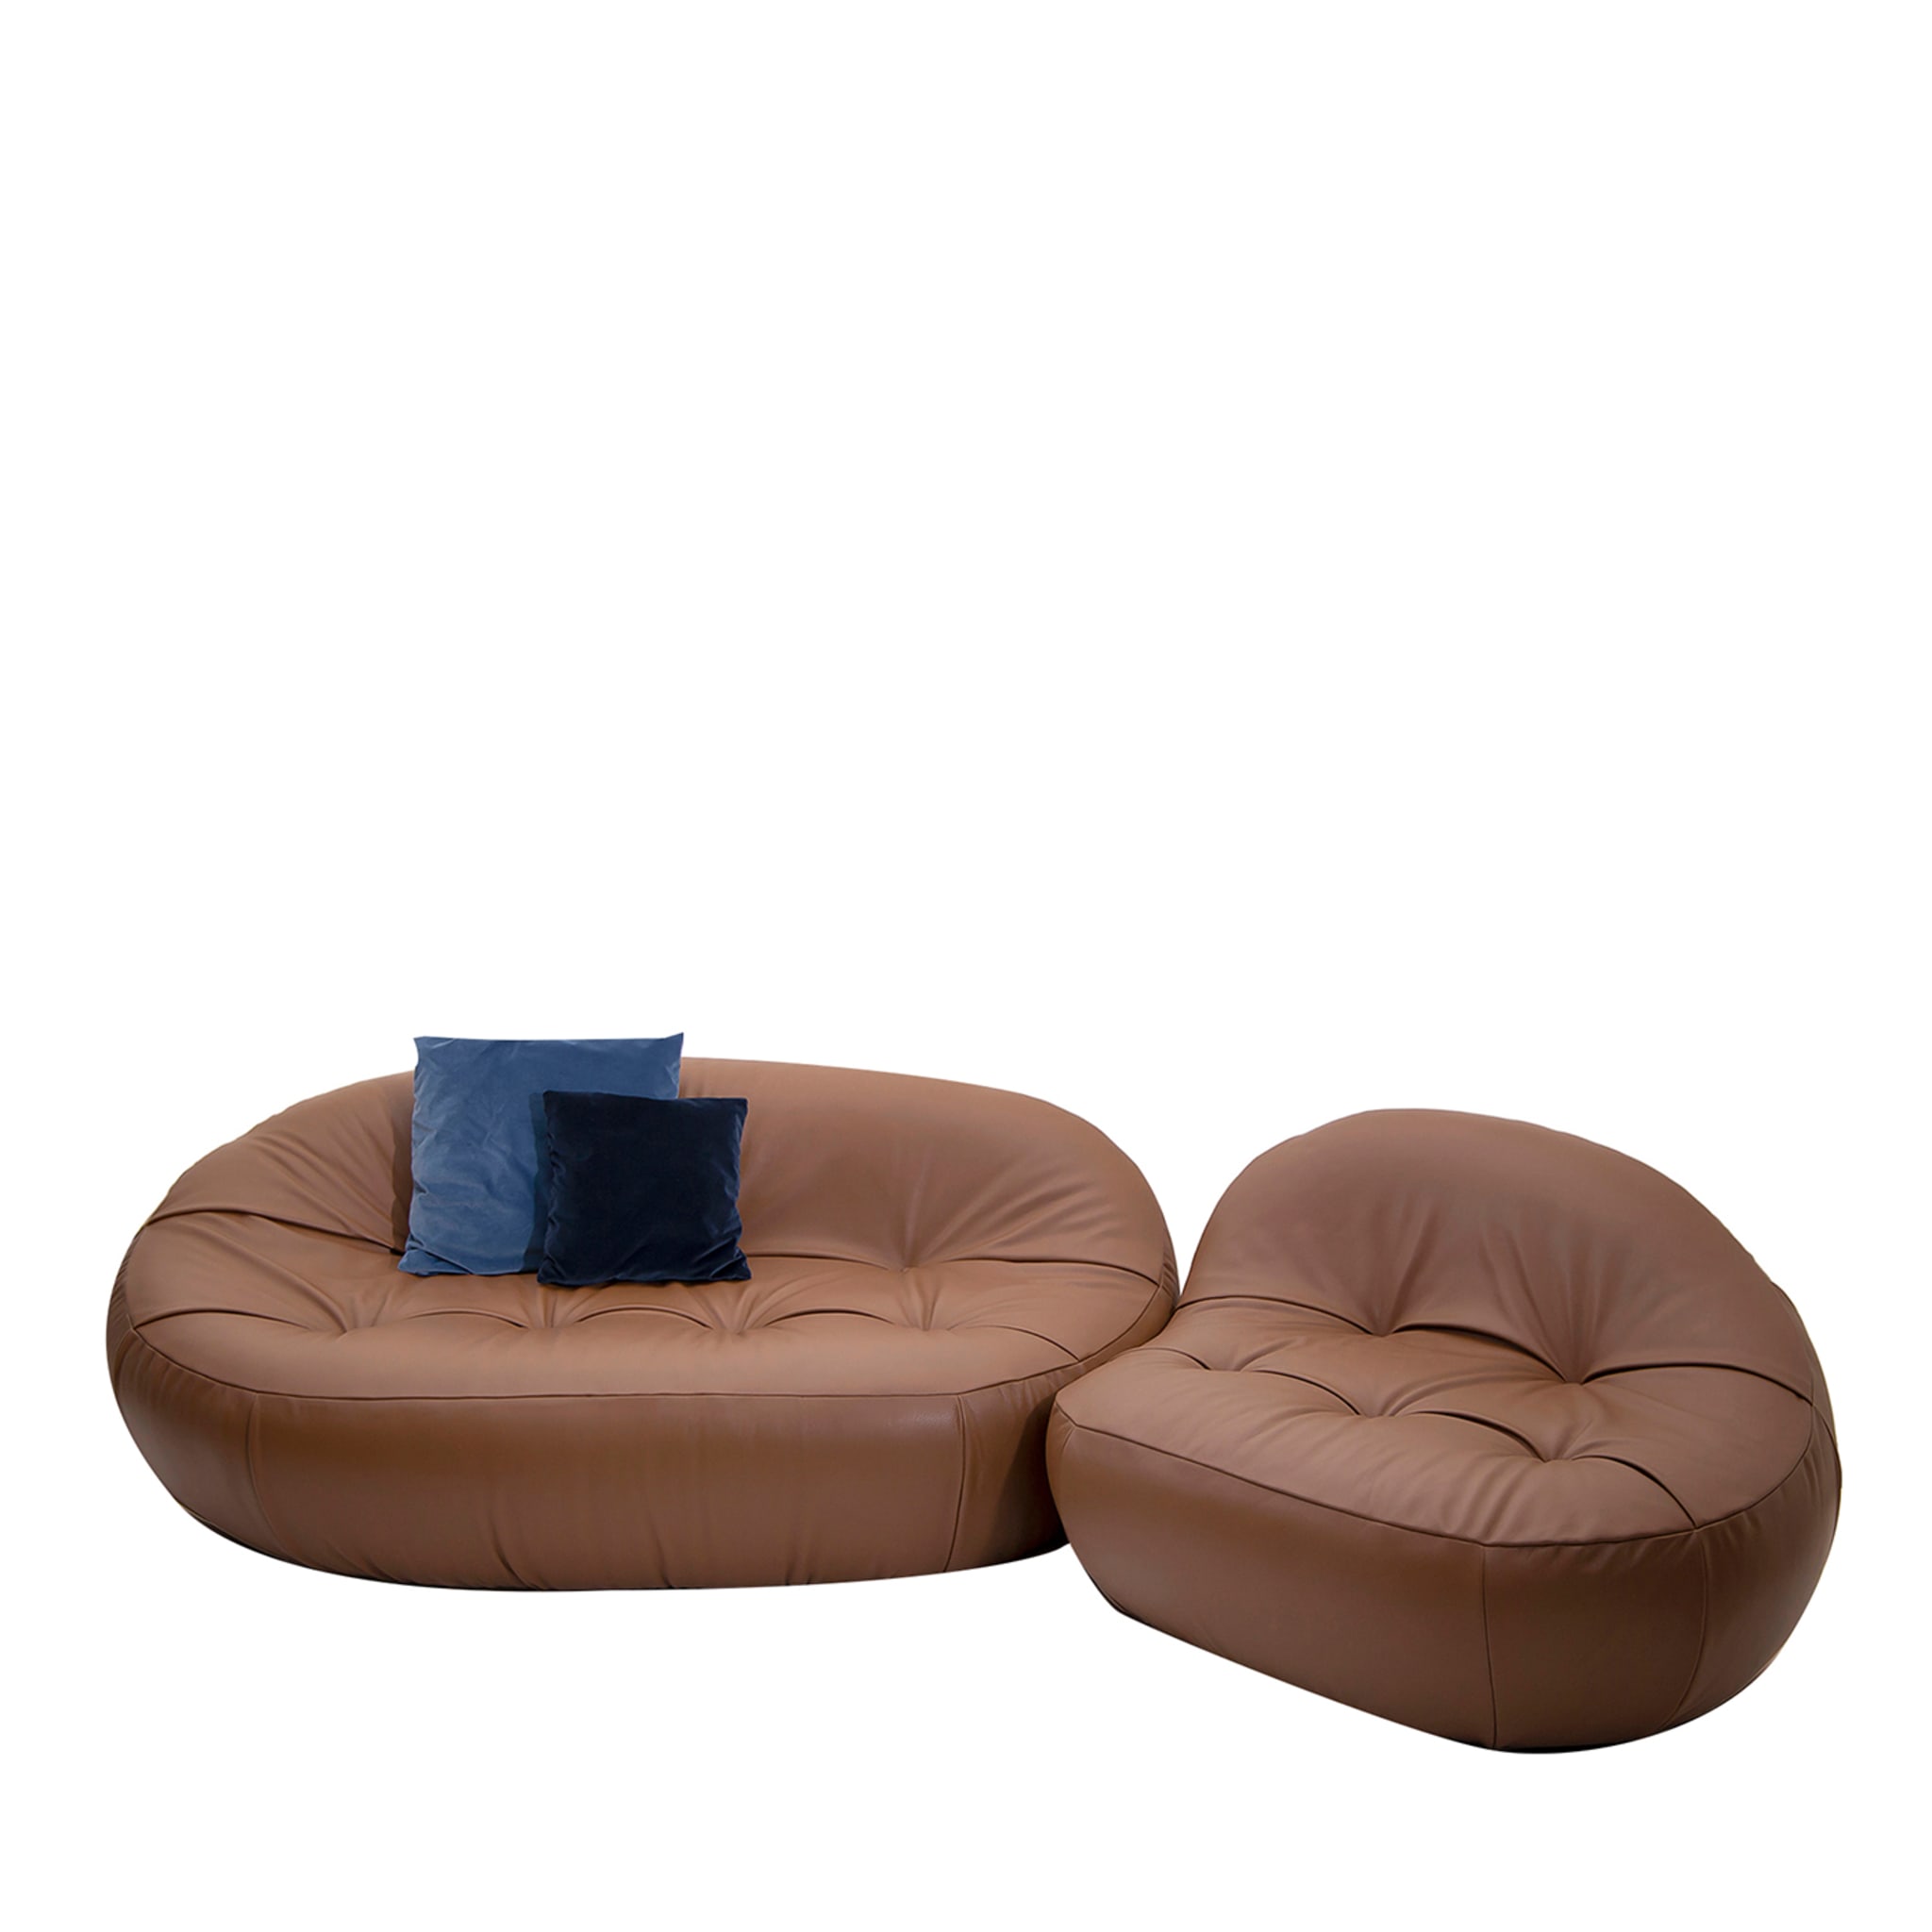 Plumpstones 200/130 Leather Sofa and Armchair - Main view